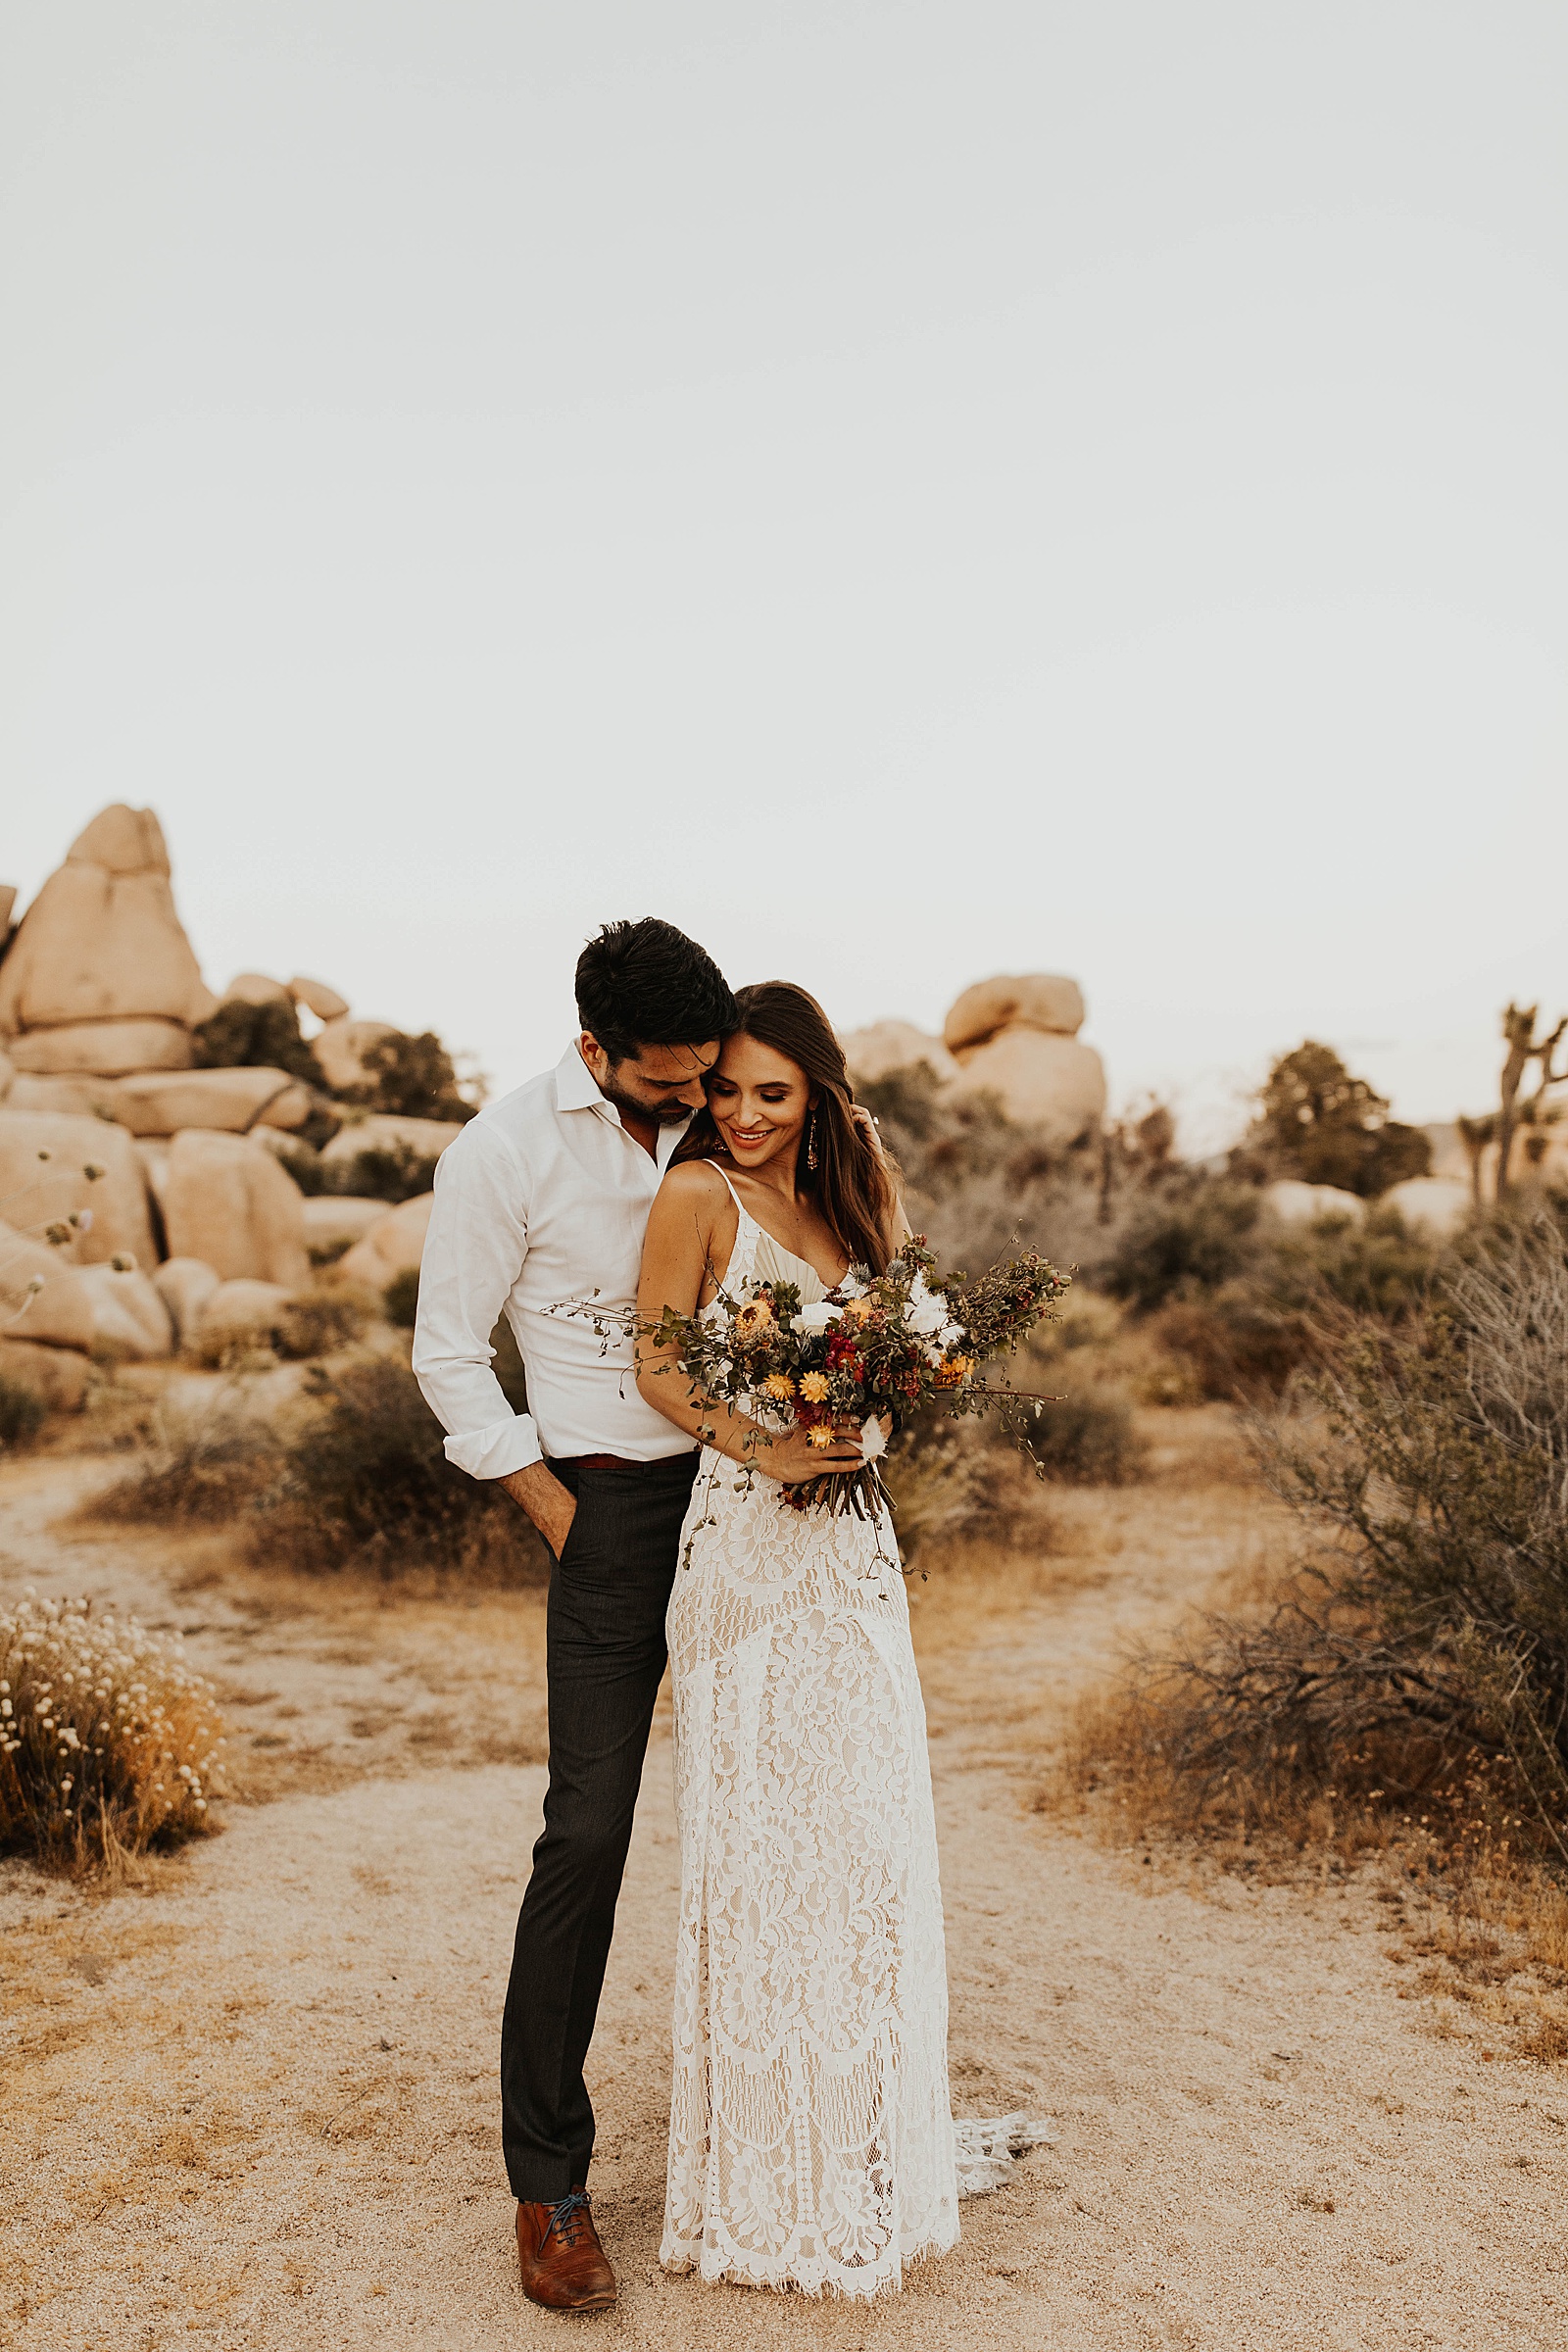 A bride and groom photo at their elopement in Hidden Valley, Joshua Tree National Park.